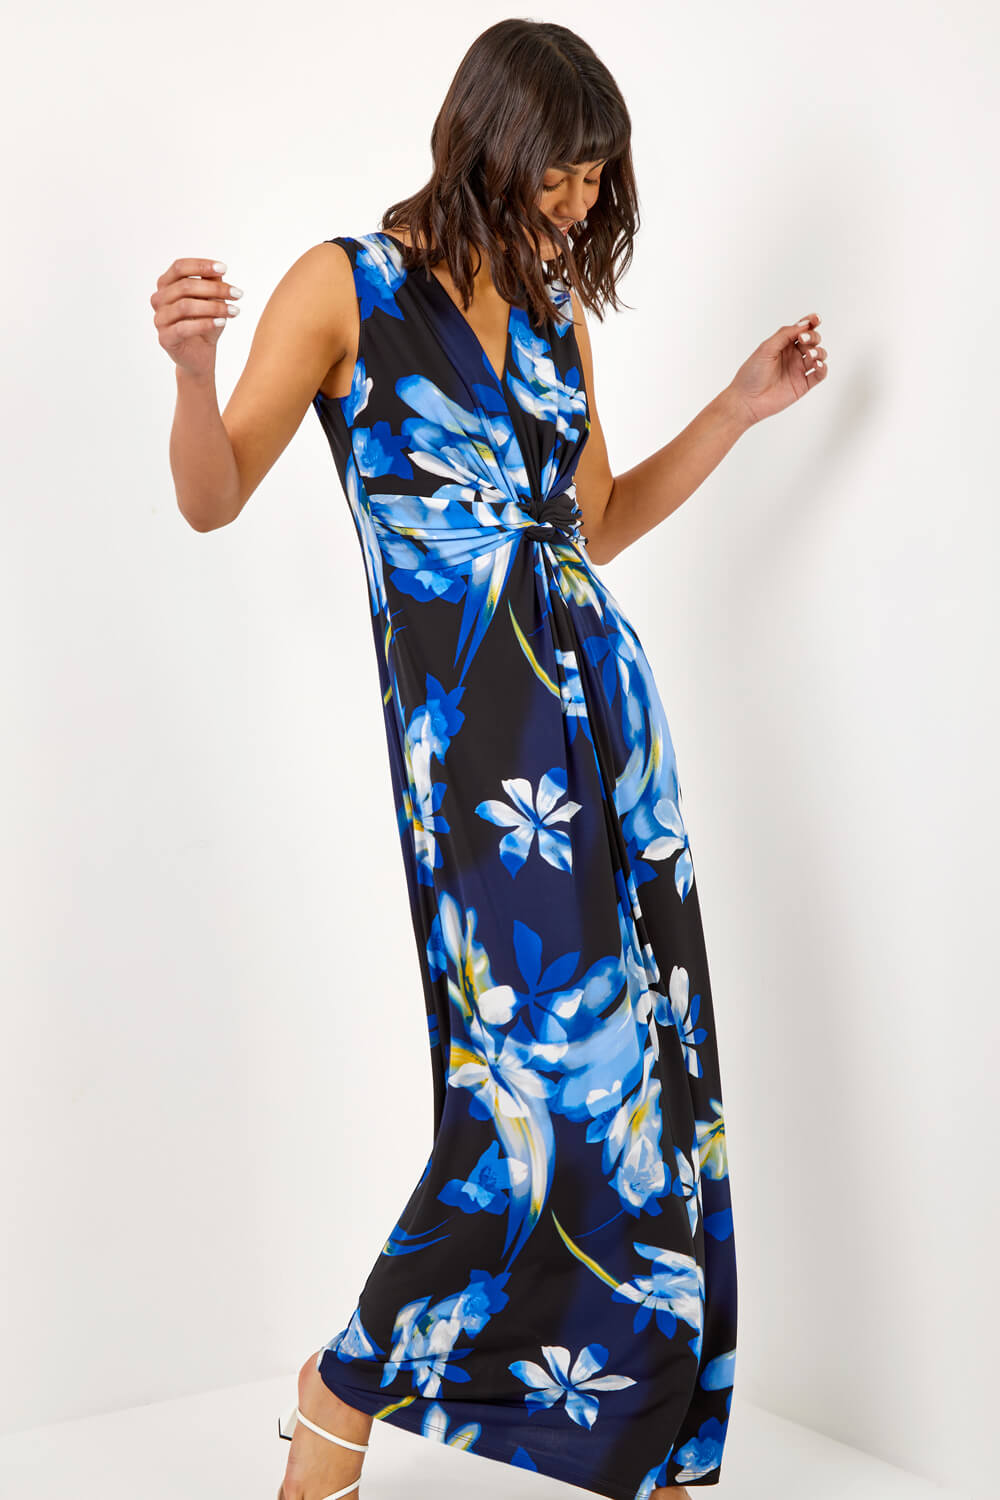 Black Floral Jersey Stretch Twist Ruched Maxi Dress, Image 3 of 5